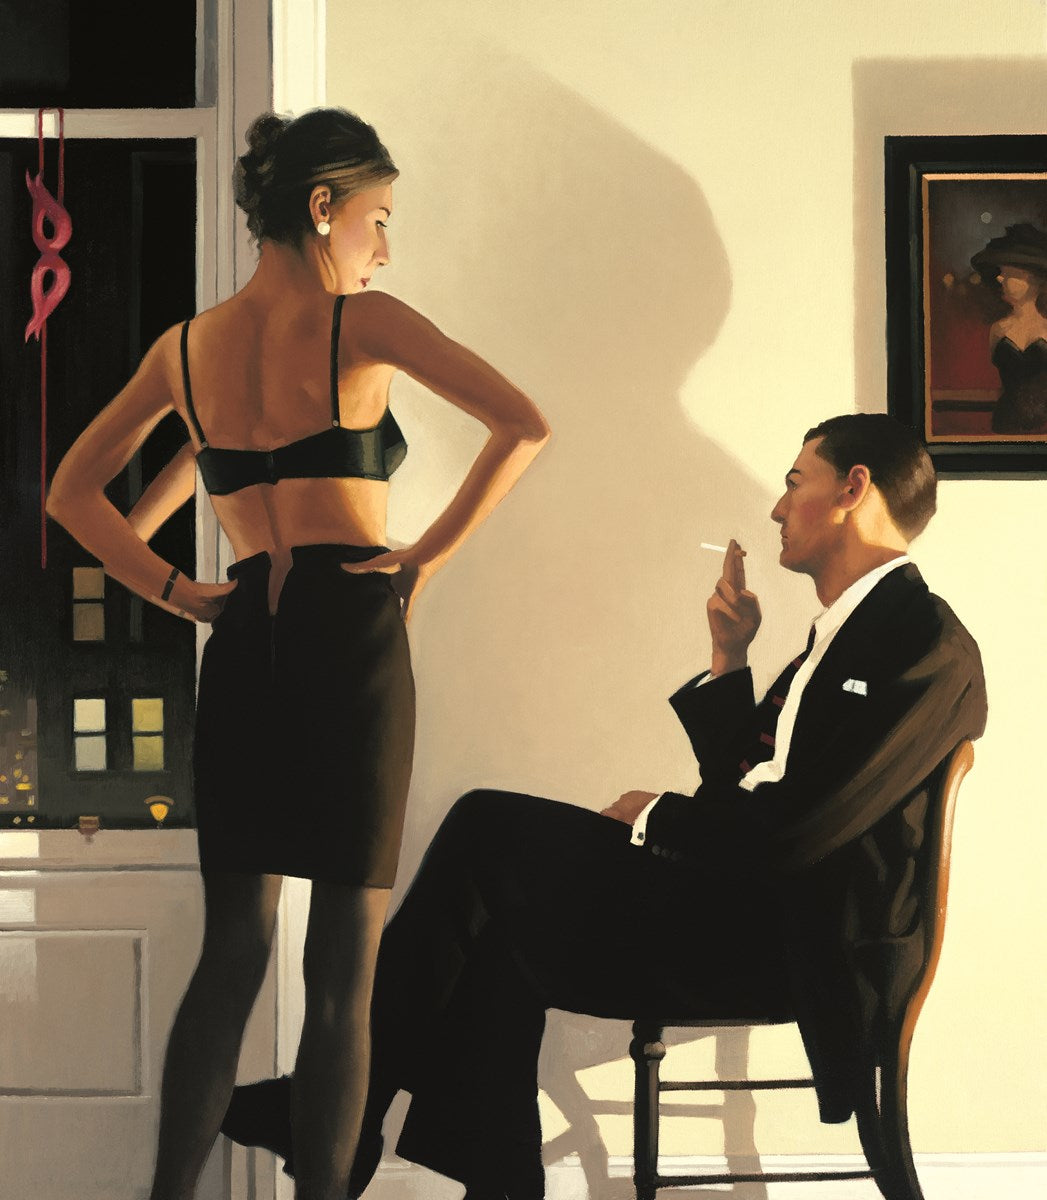 Night in the City by Jack Vettriano